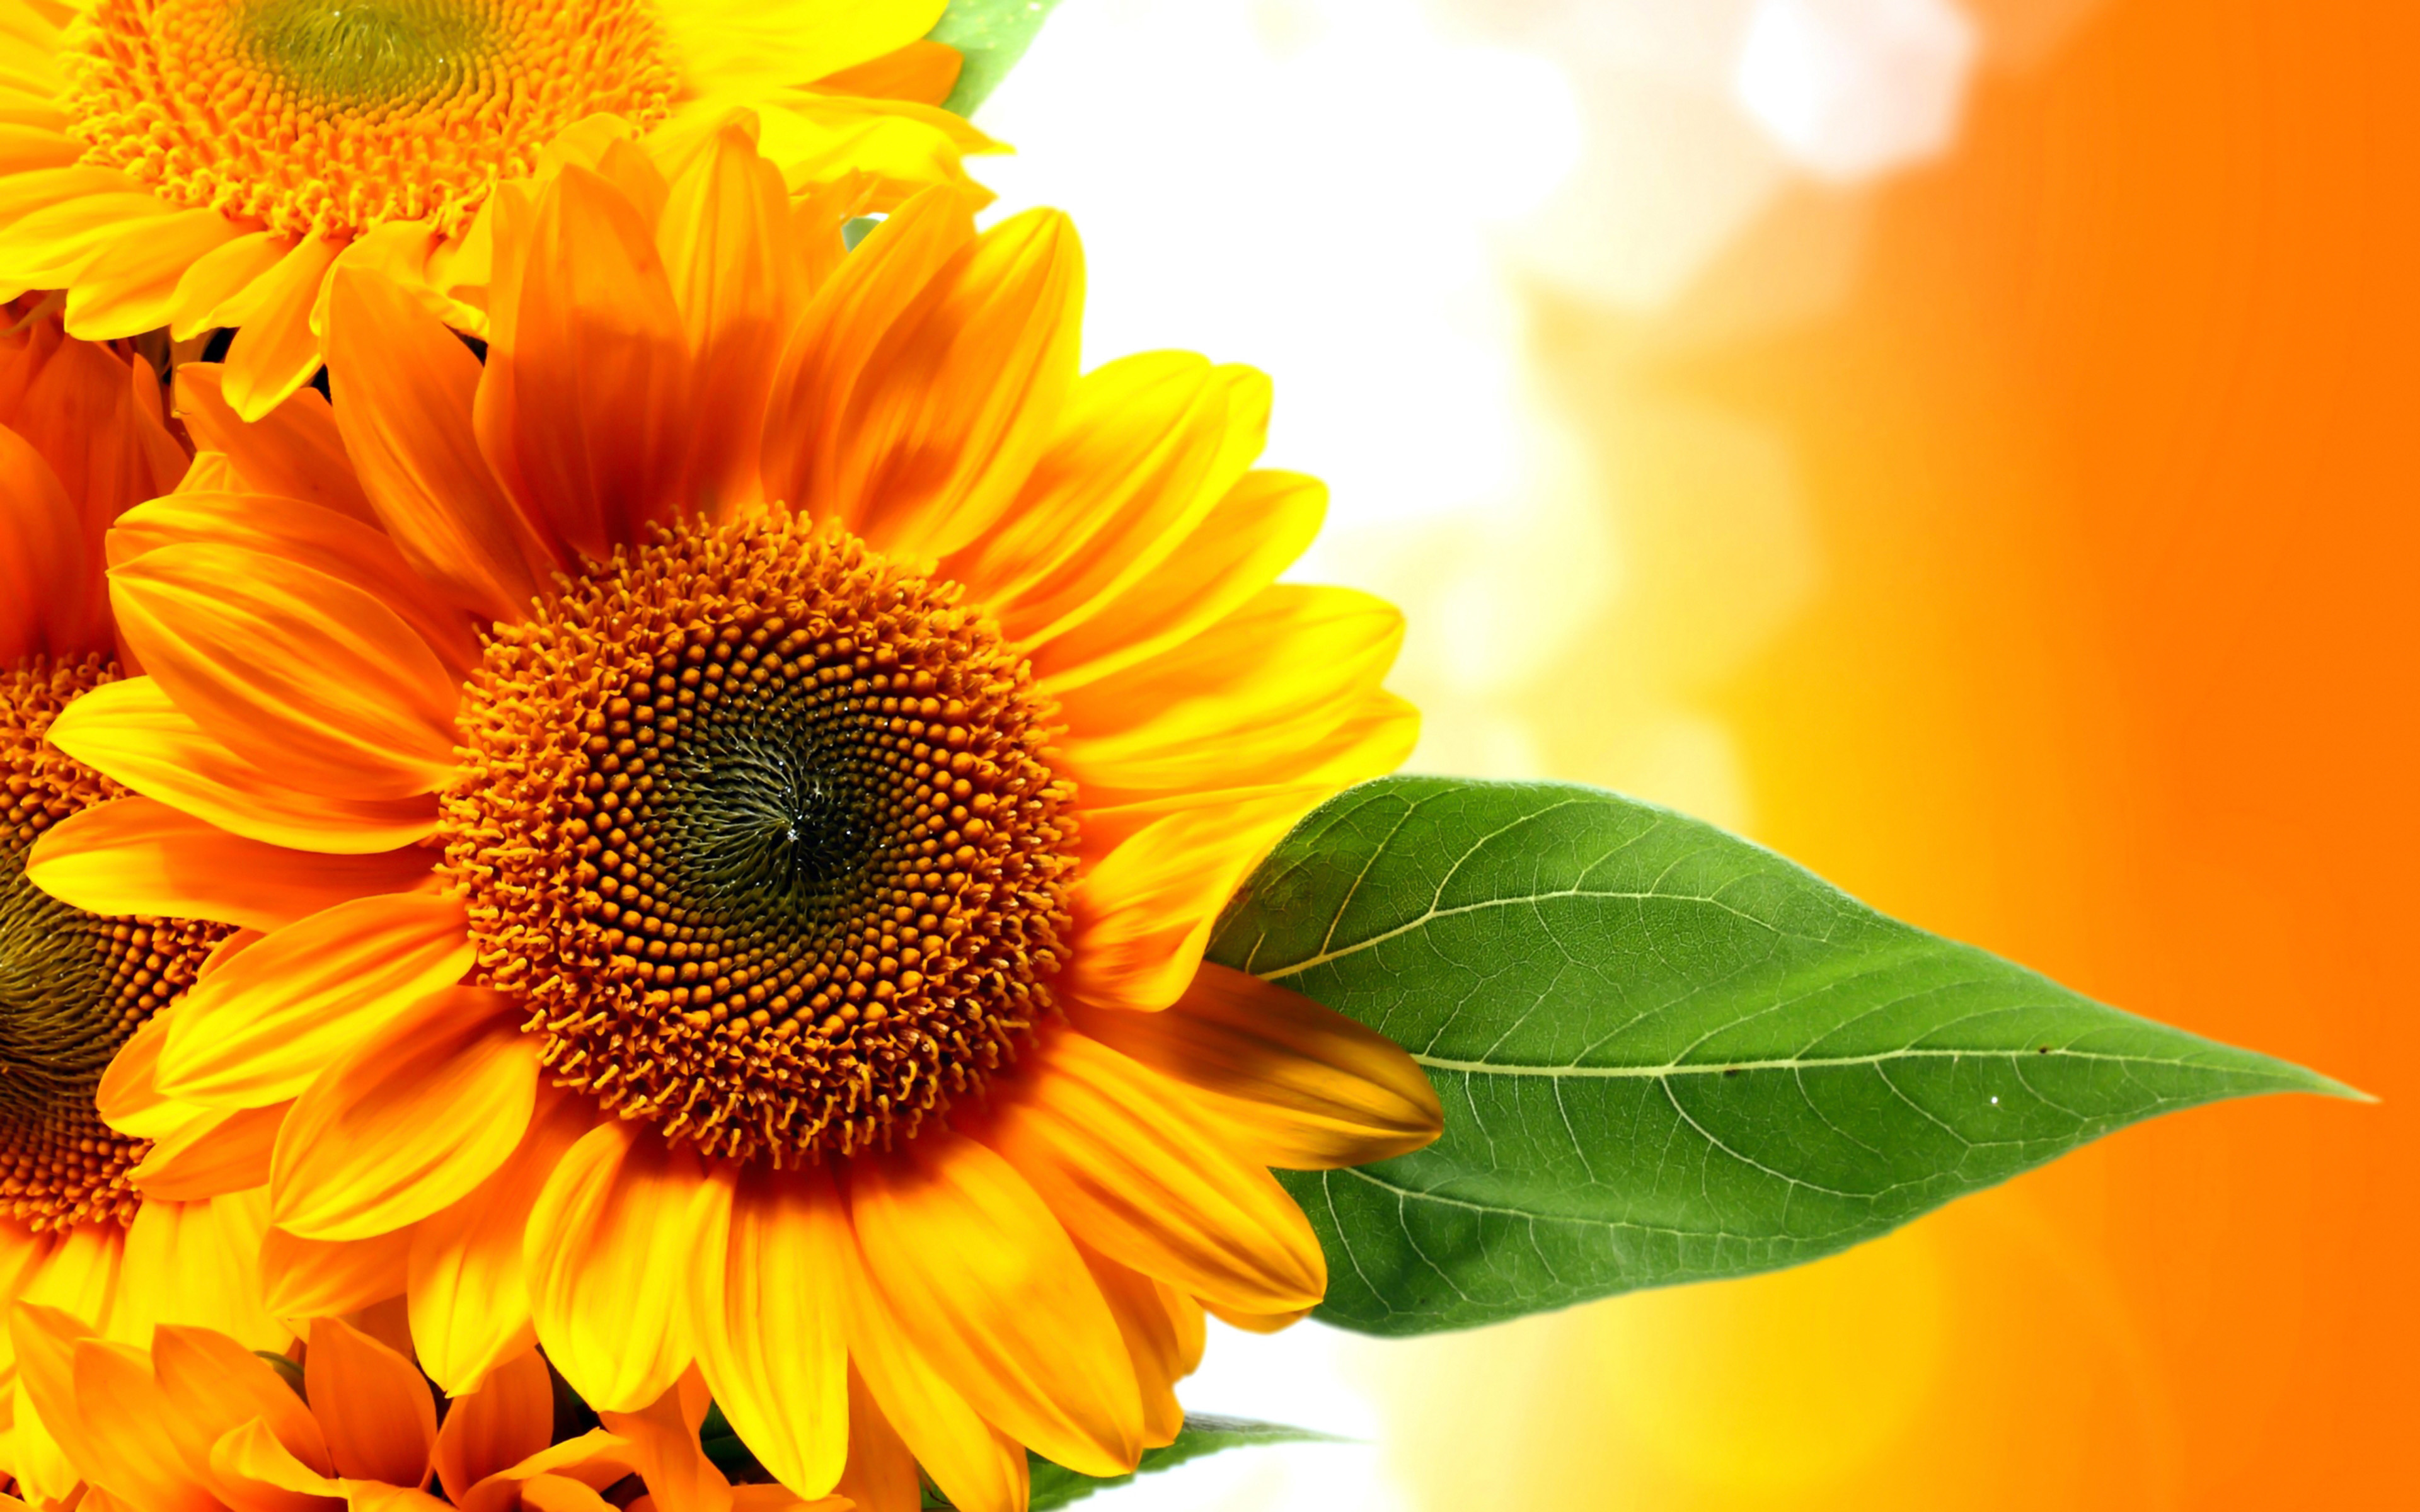 Sunflower orange flowers beautiful golden hd wallpaper for puters laptop tablet and mobile phones x